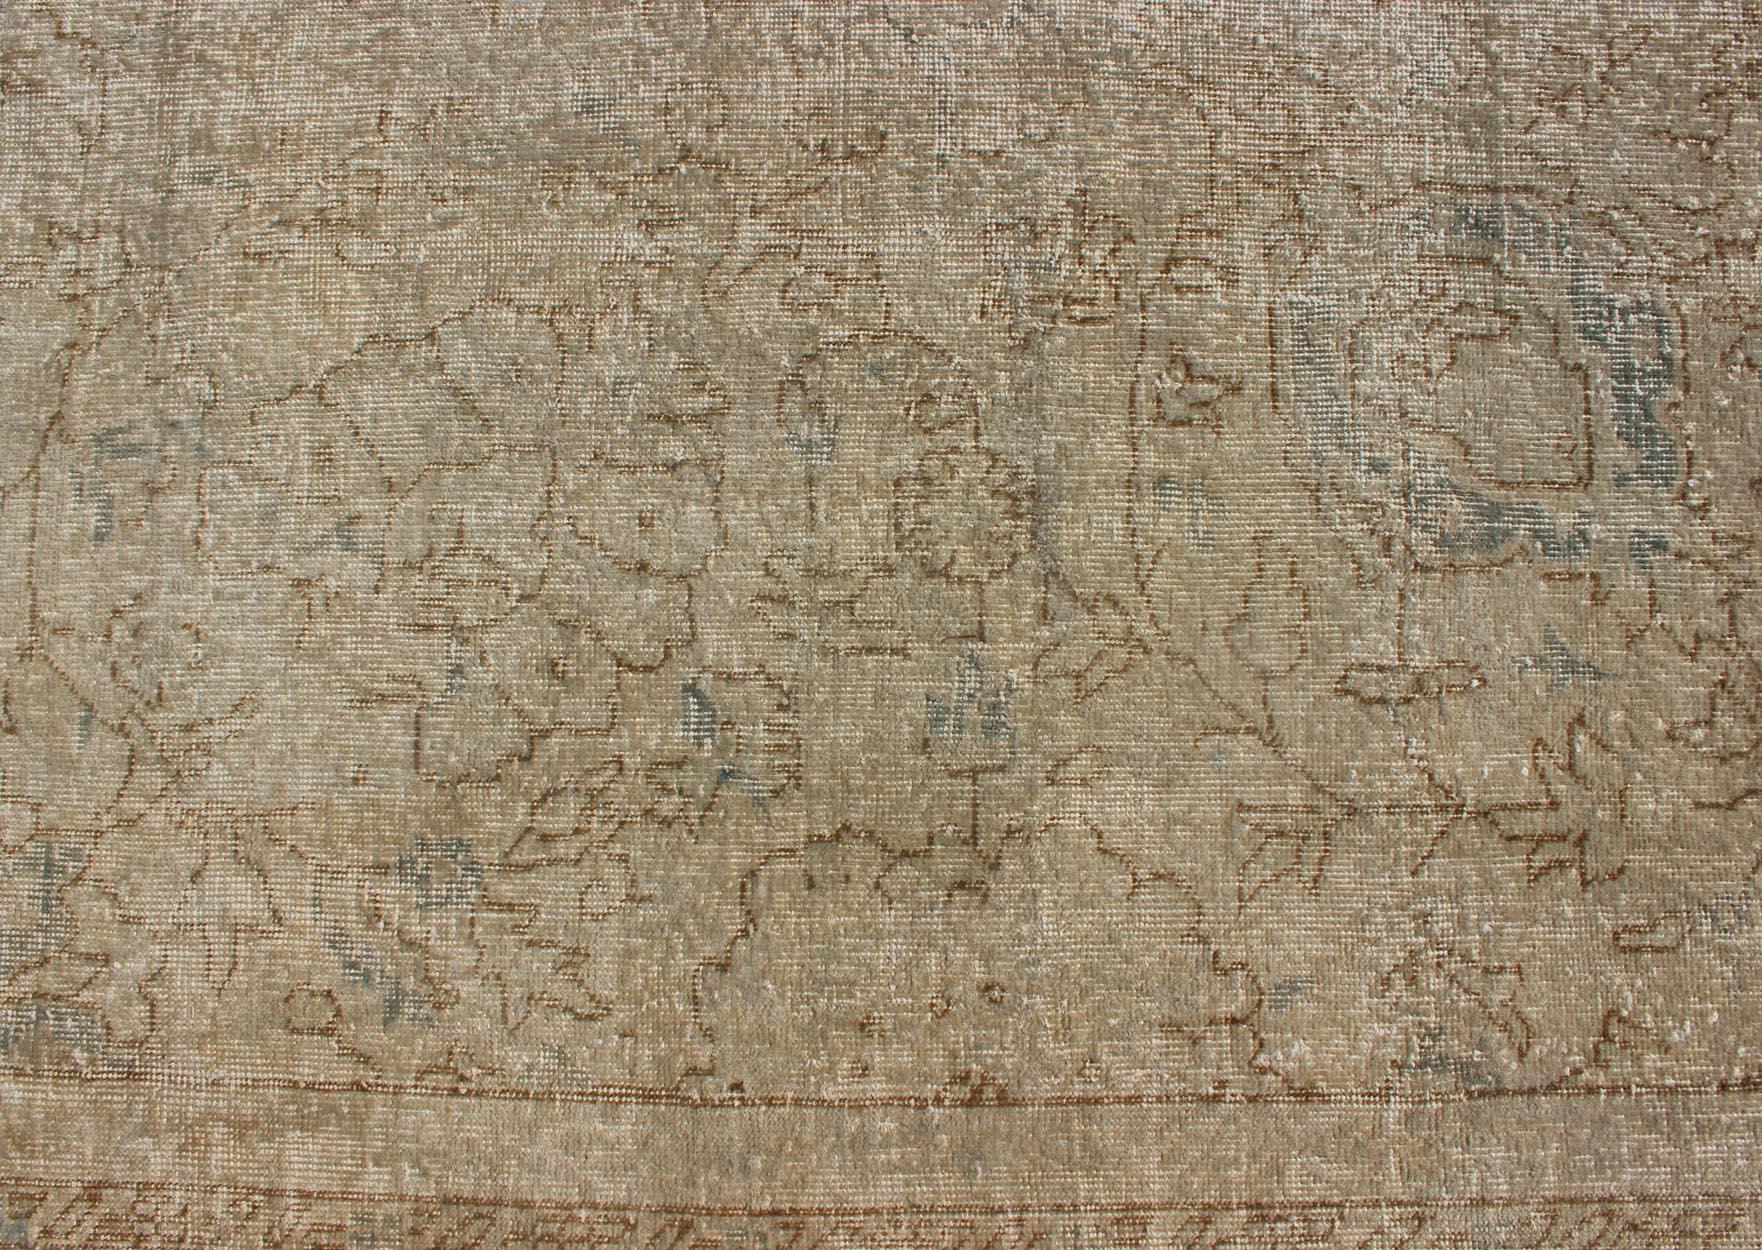 Mid-20th Century Distressed Turkish Carpet with Floral Design in Taupe, Gray, Brown and Cream